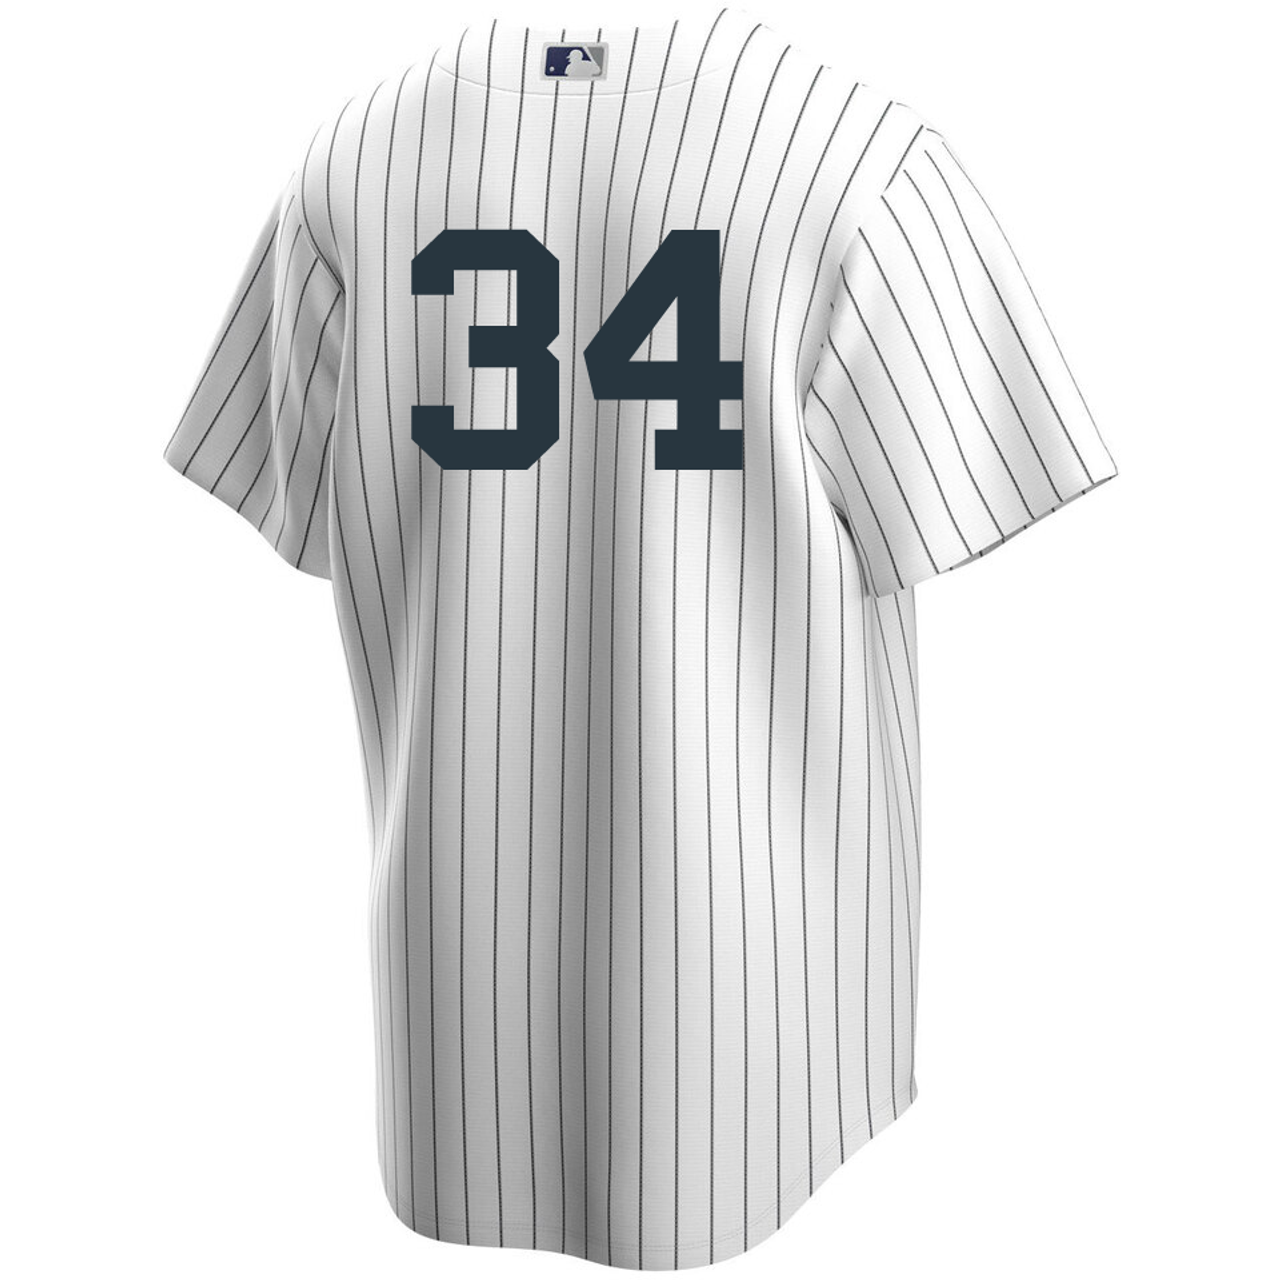 Michael King No Name Jersey - NY Yankees Number Only Replica Jersey